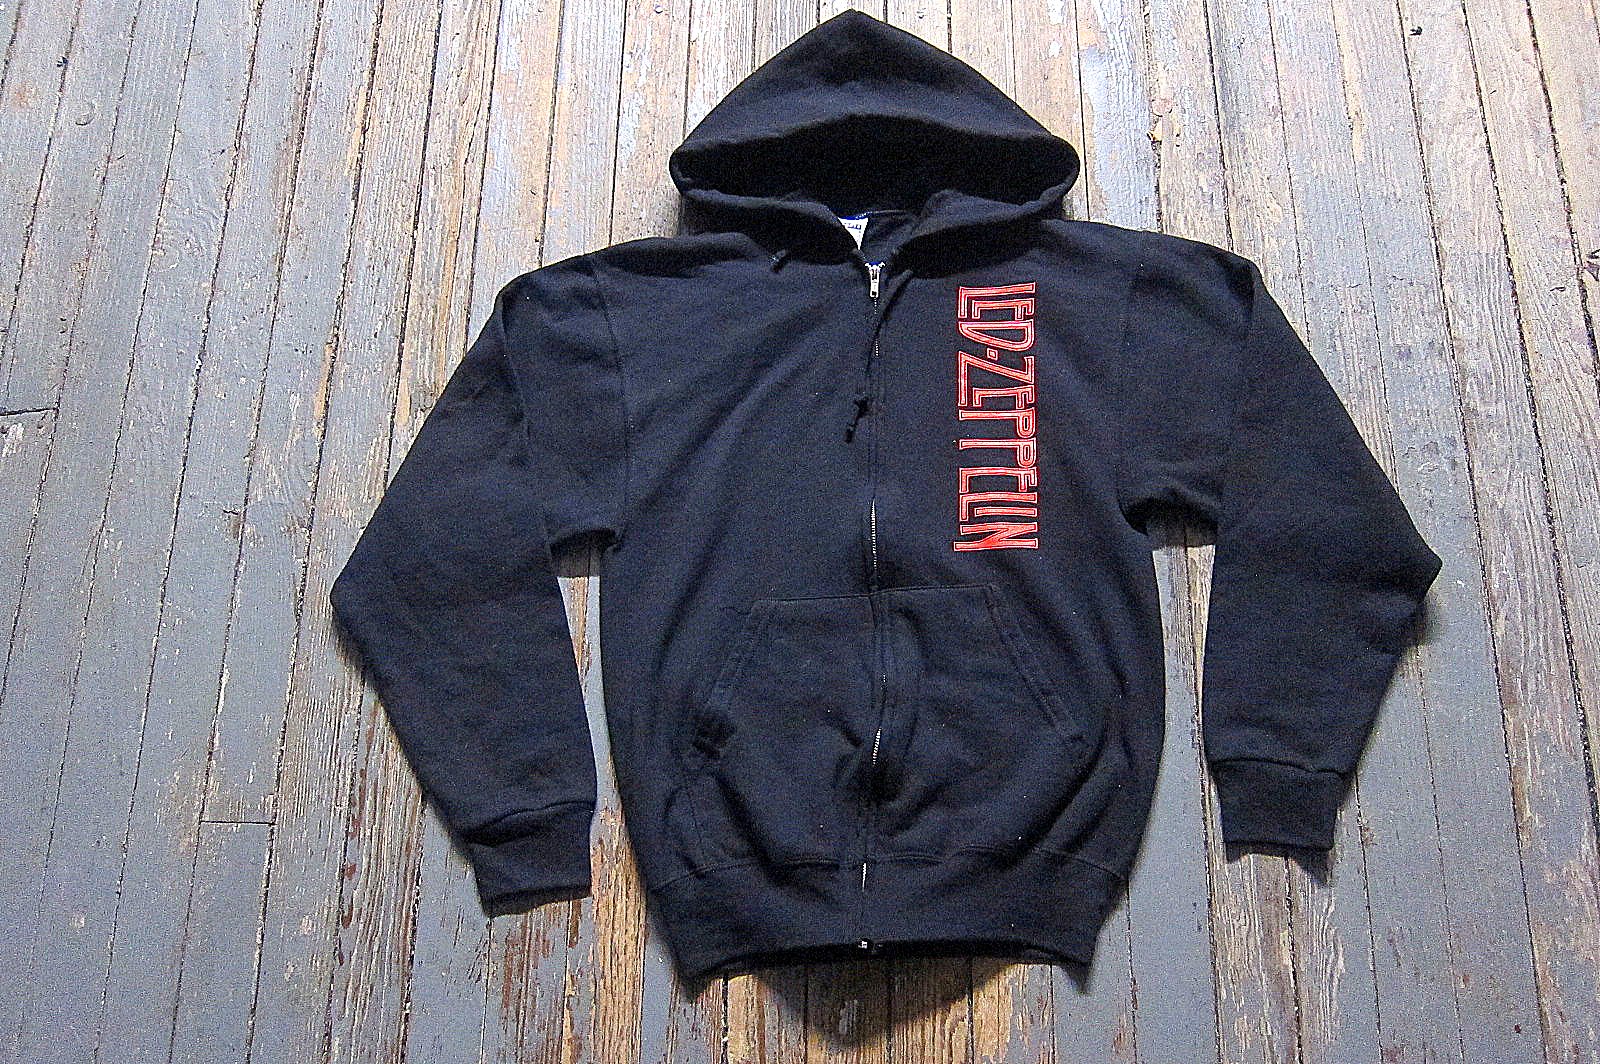 Led Zeppelin - Two Sided Printed Zipper Hoodie